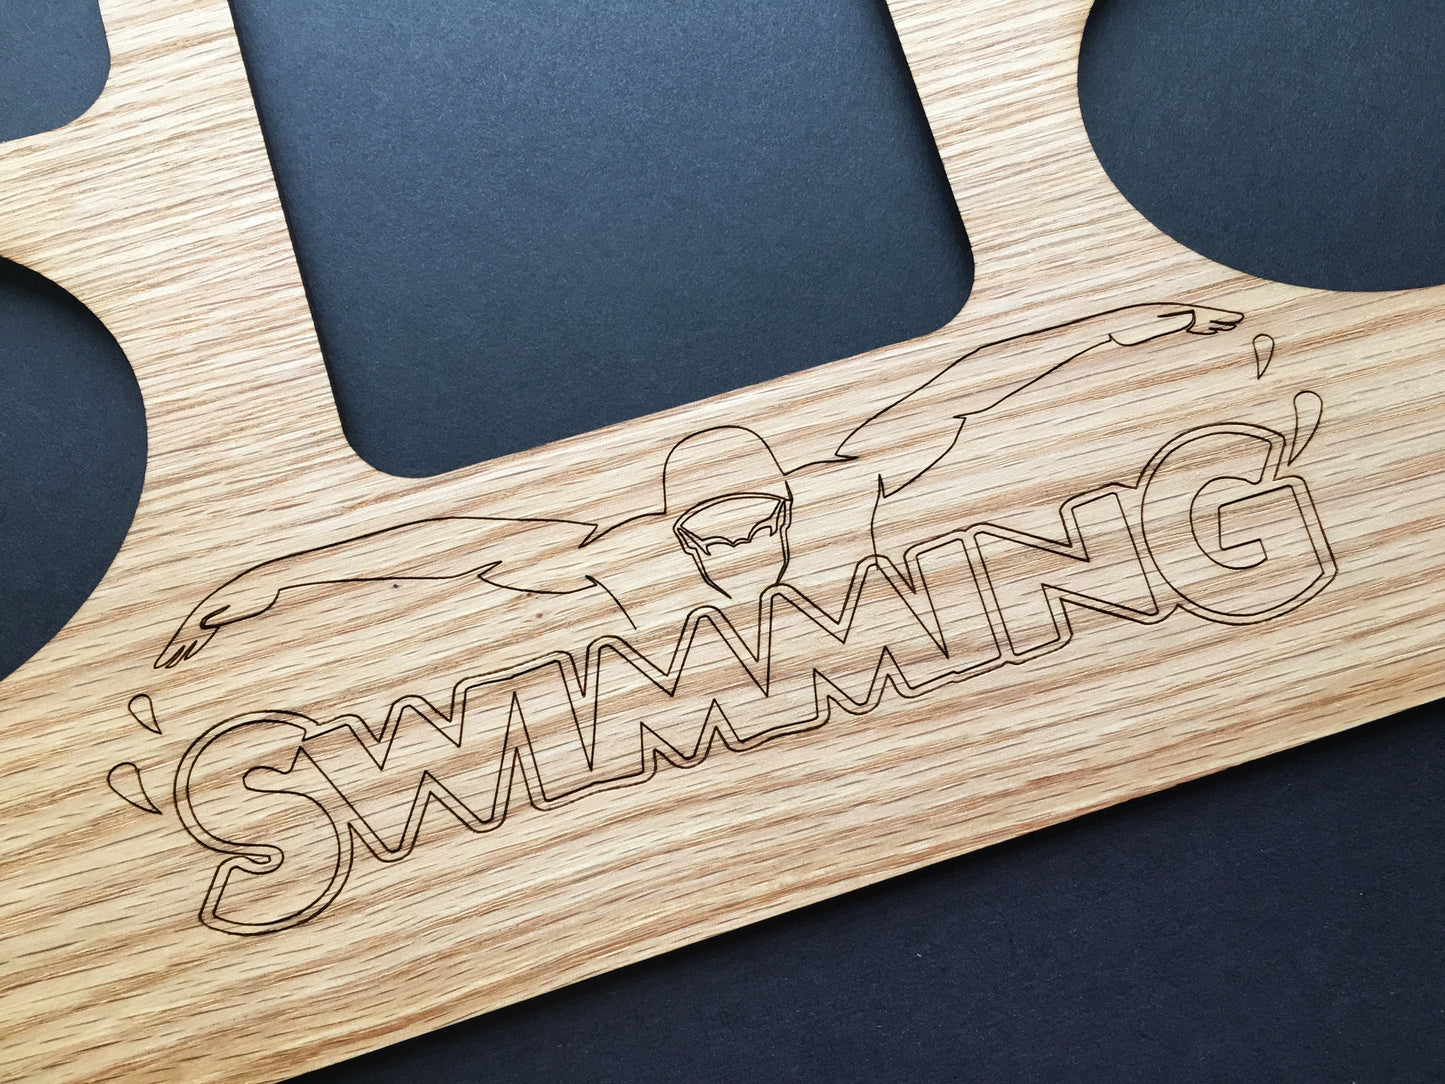 Swimming Picture Frame